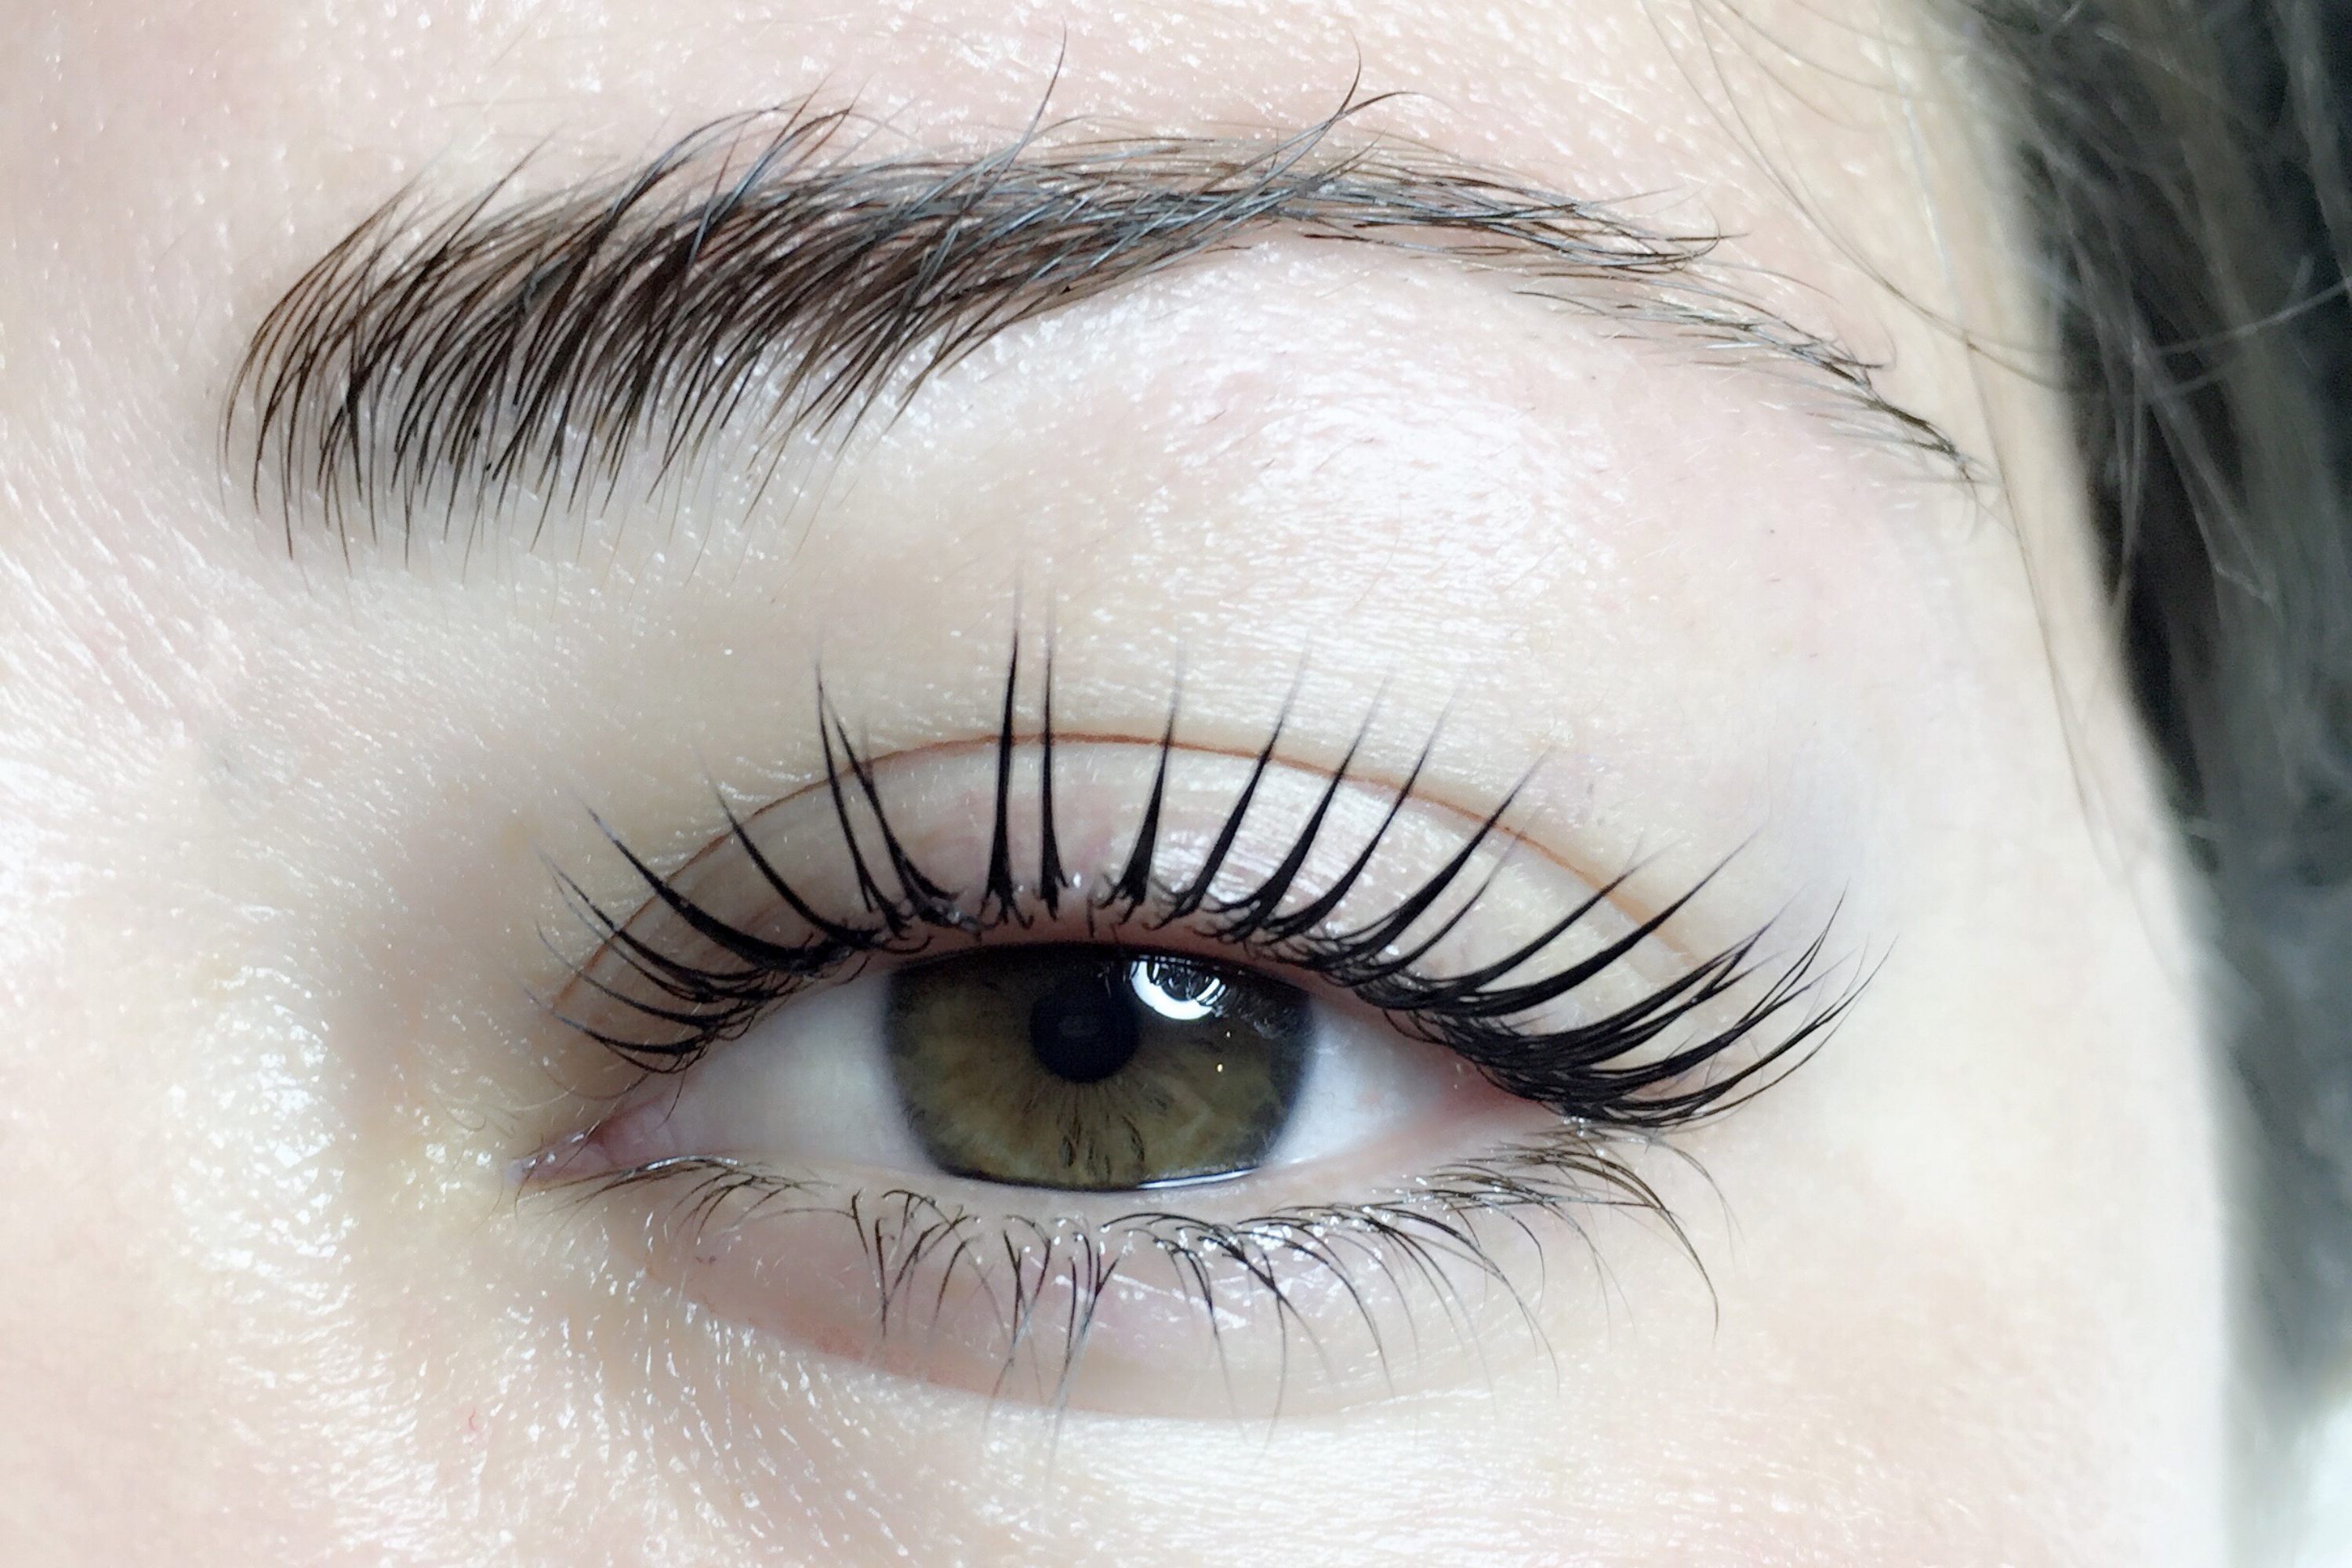 We tried keratin lash treatment for naturally lifted, eye-opening lashes